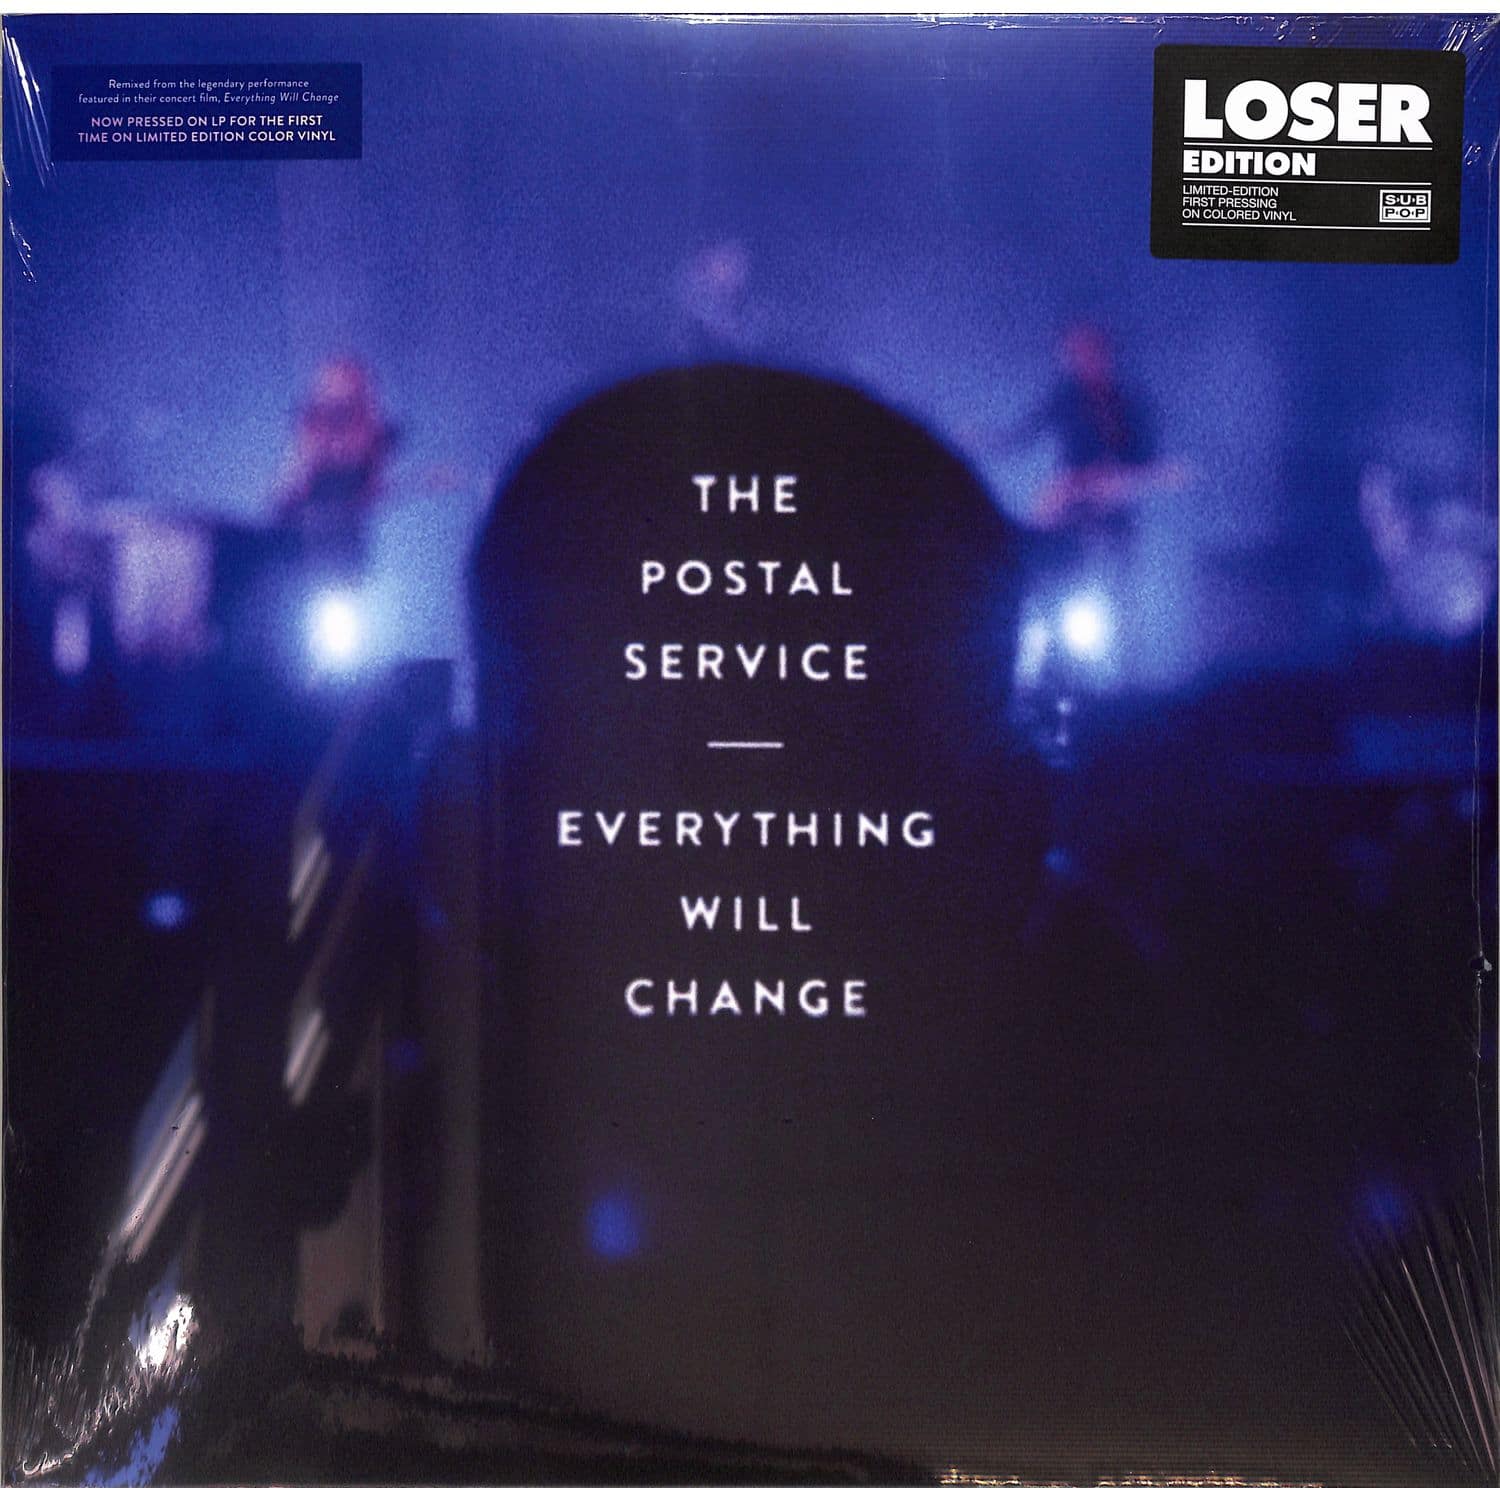 The Postal Service - EVERYTHING WILL CHANGE 